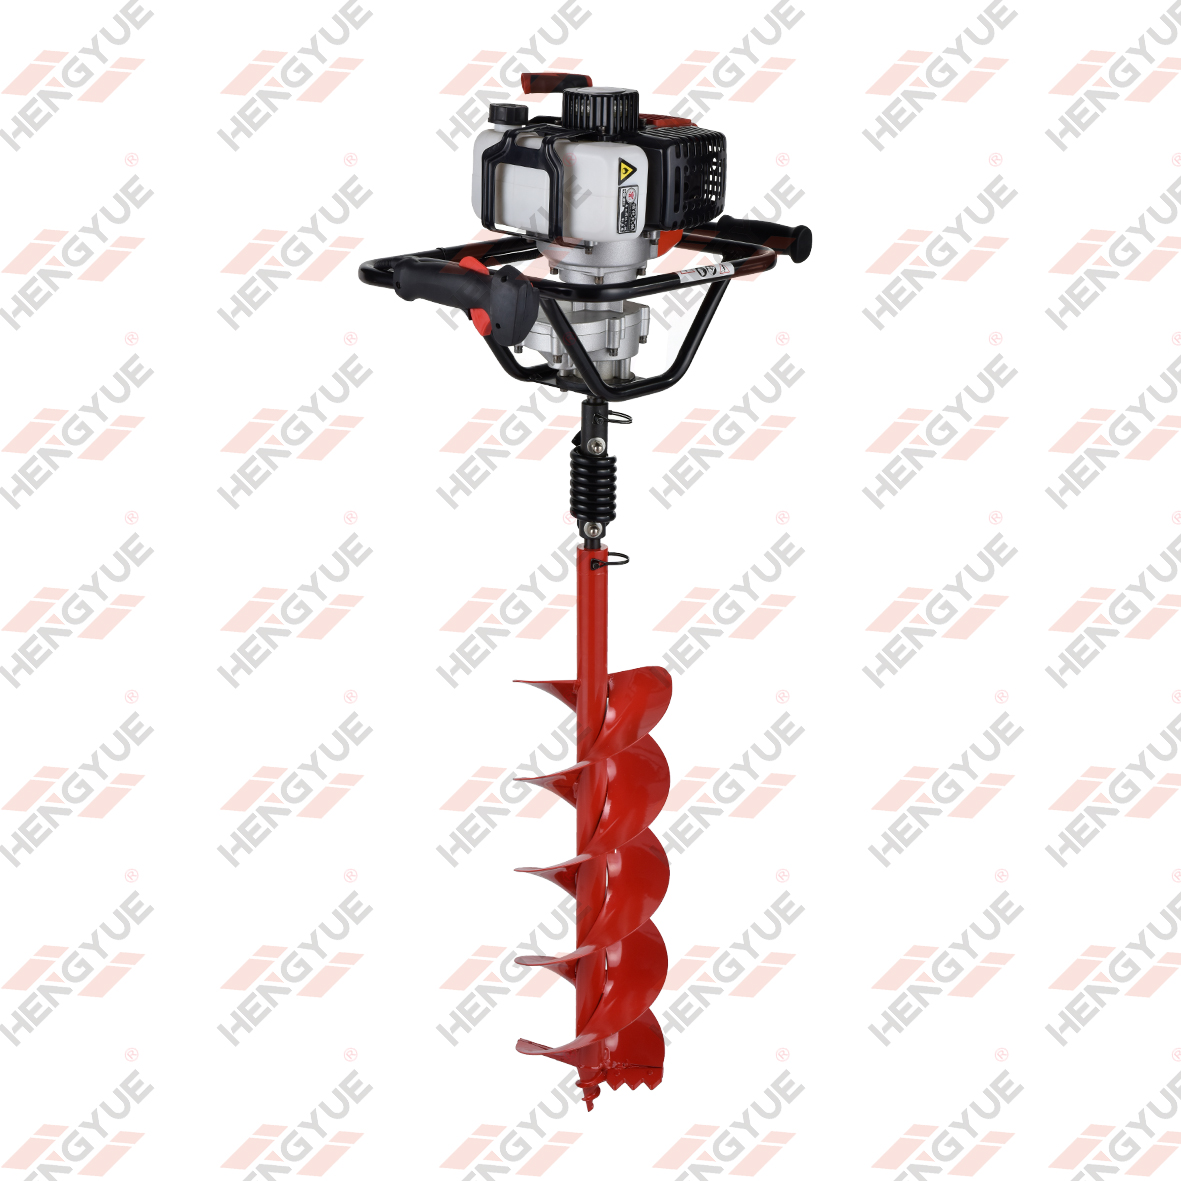 58cc Engine Power Earth Auger 